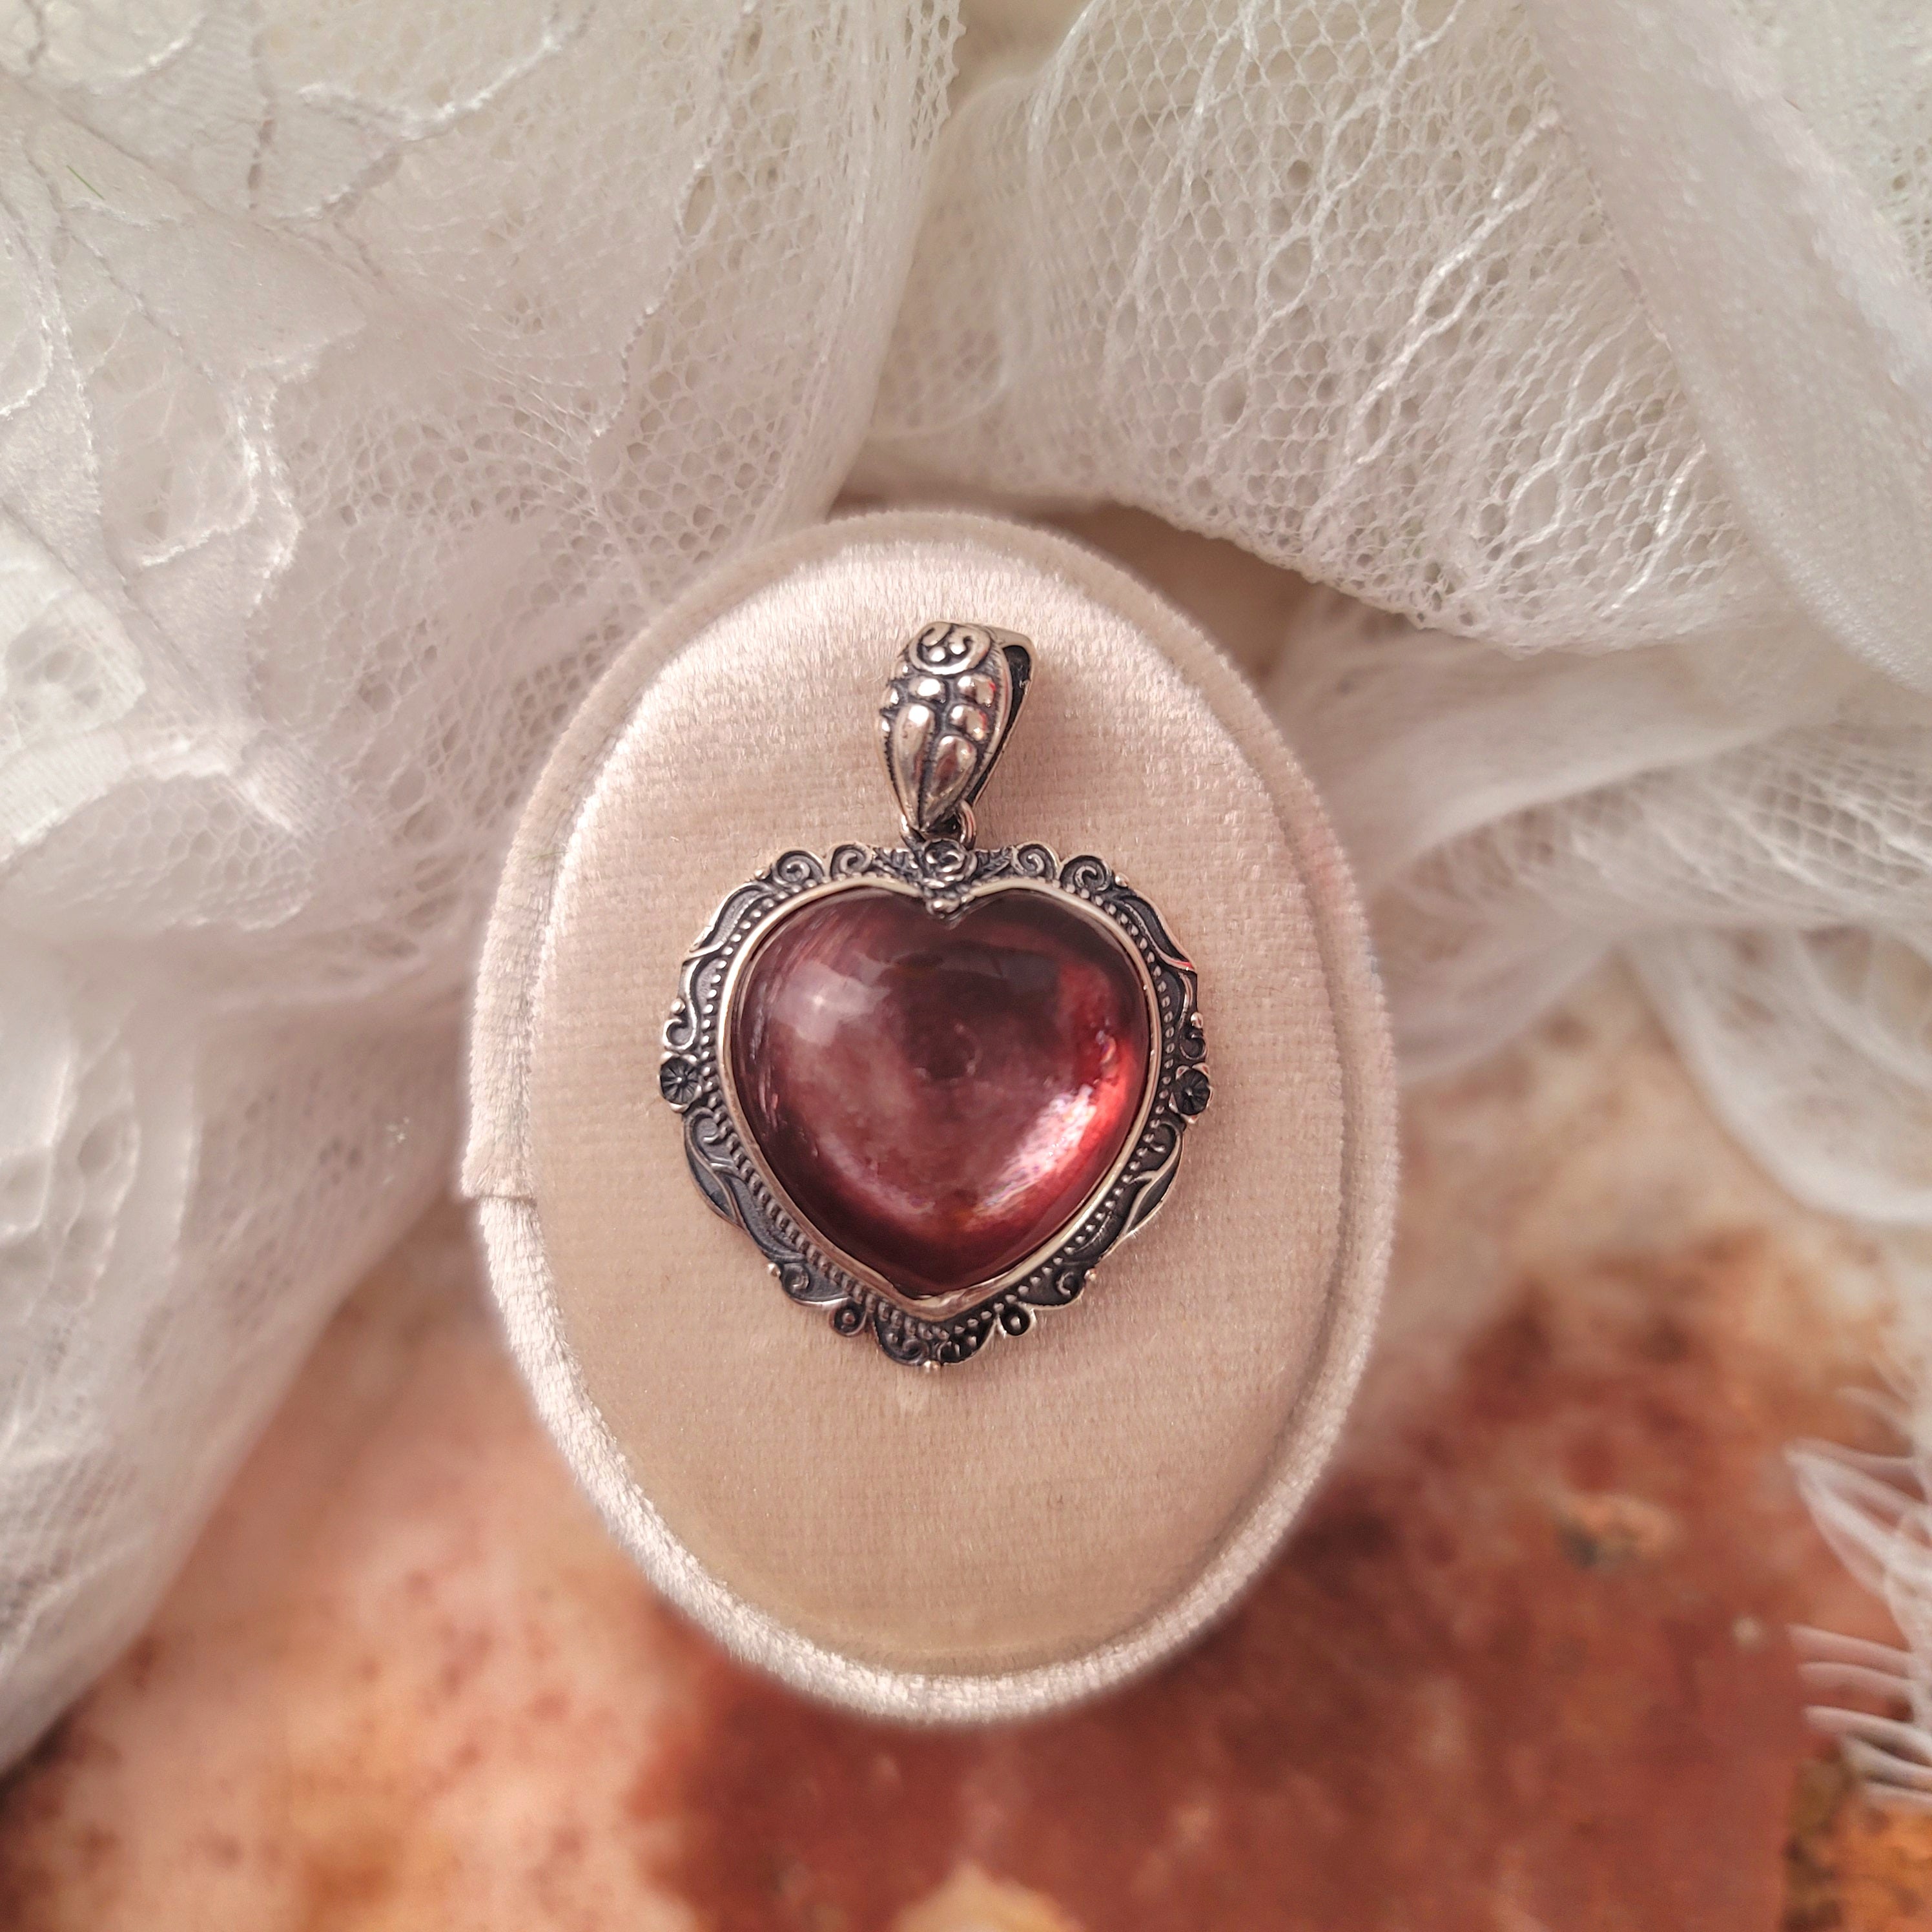 Gem Lepidolite Heart Pendant for Anxiety Support, Joy and Stress Relief